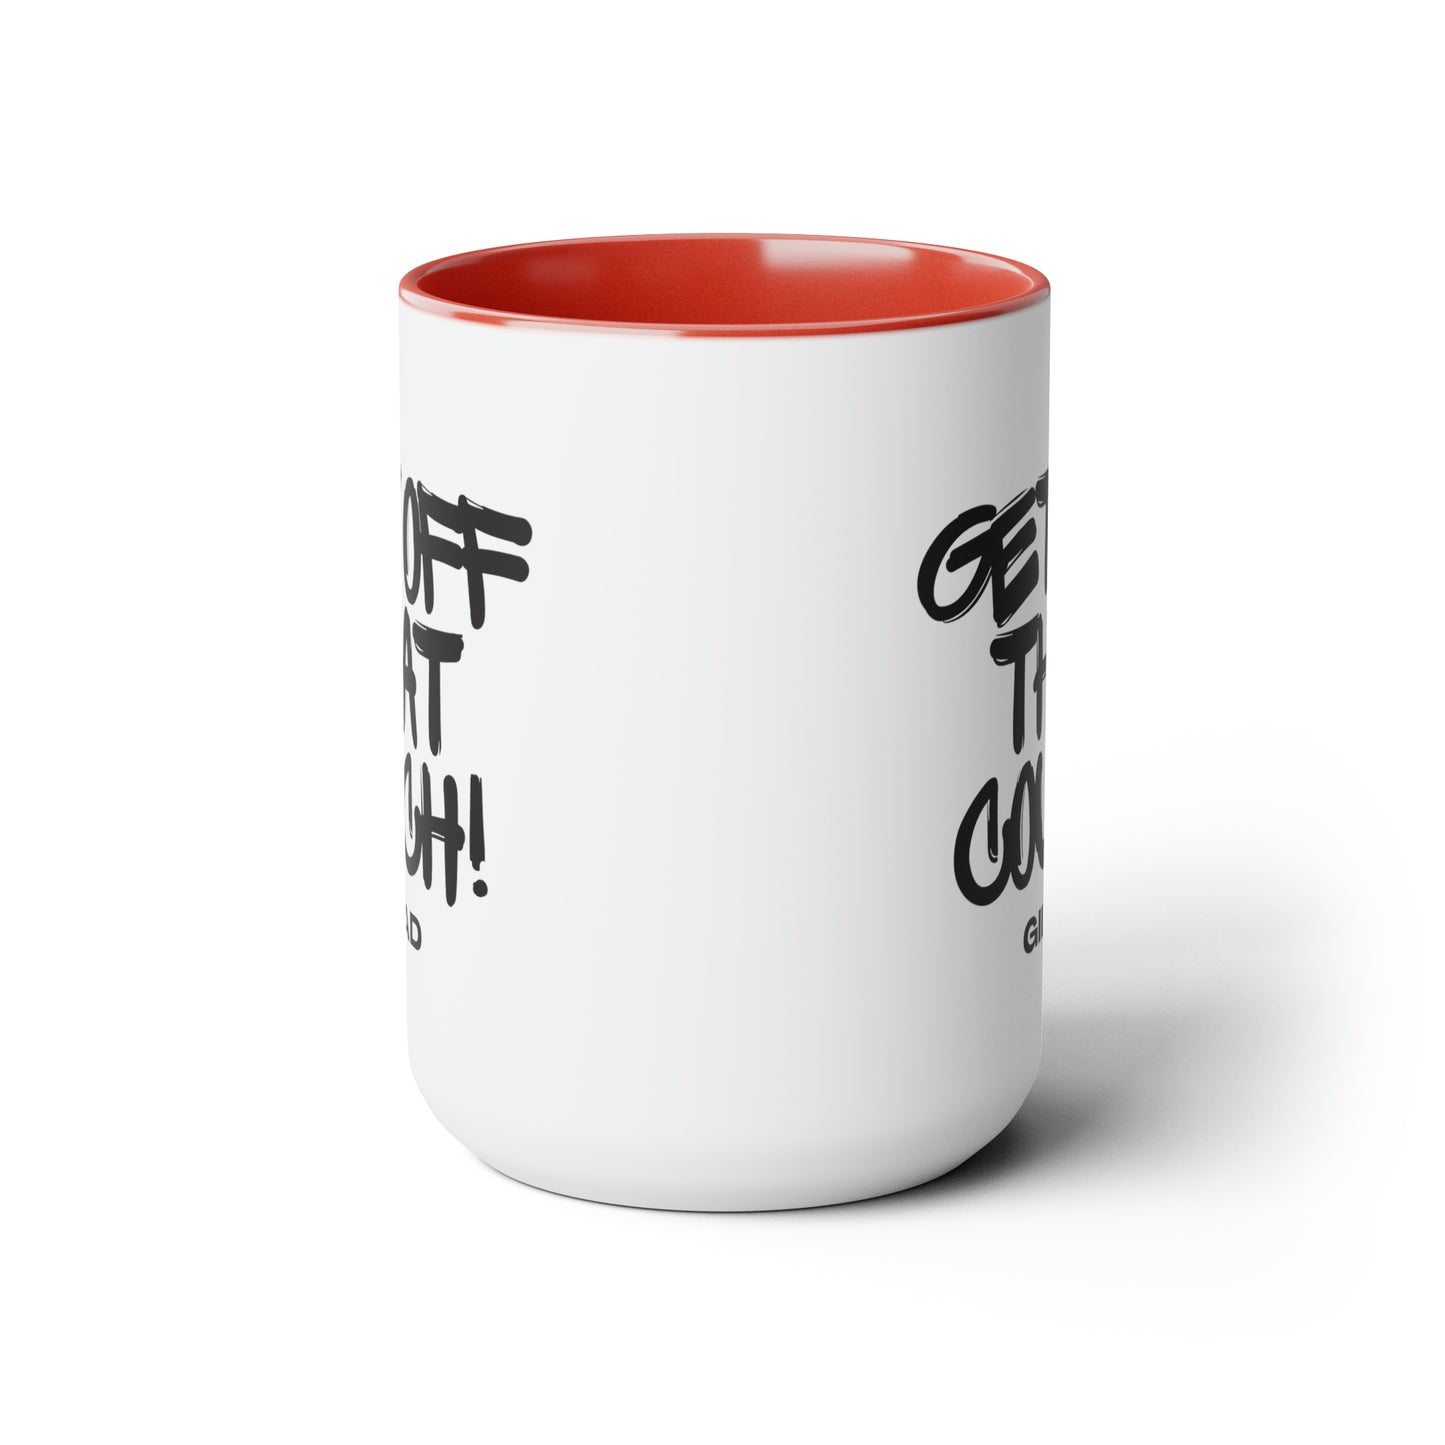 Get Off That Couch | Two-Tone Coffee Mugs, 15oz